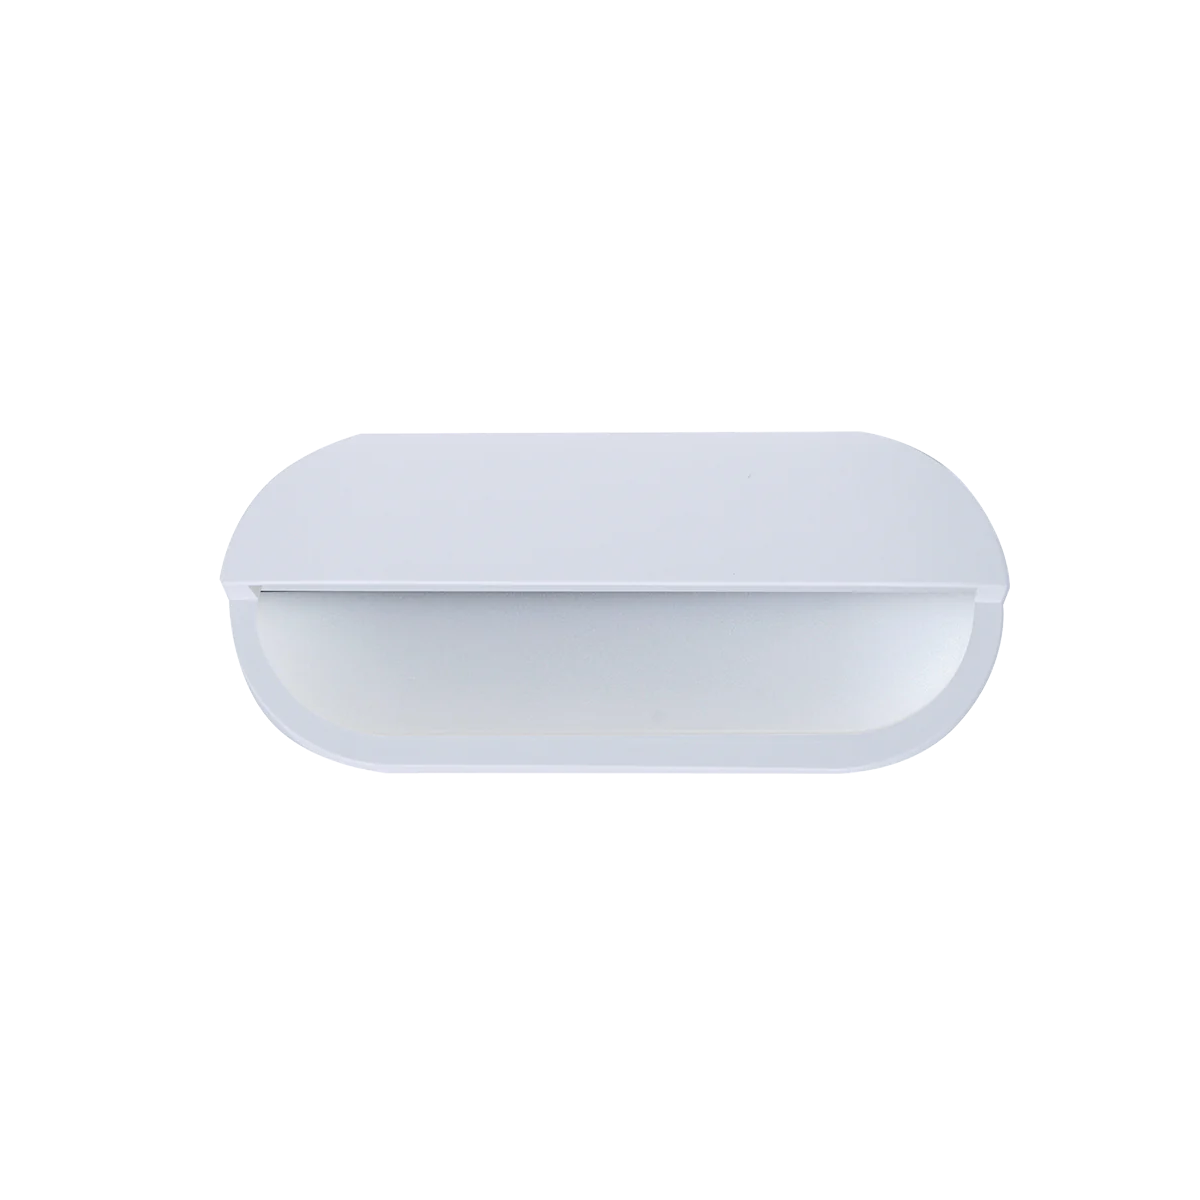 product image of white eyelid bulkhead for exterior walls